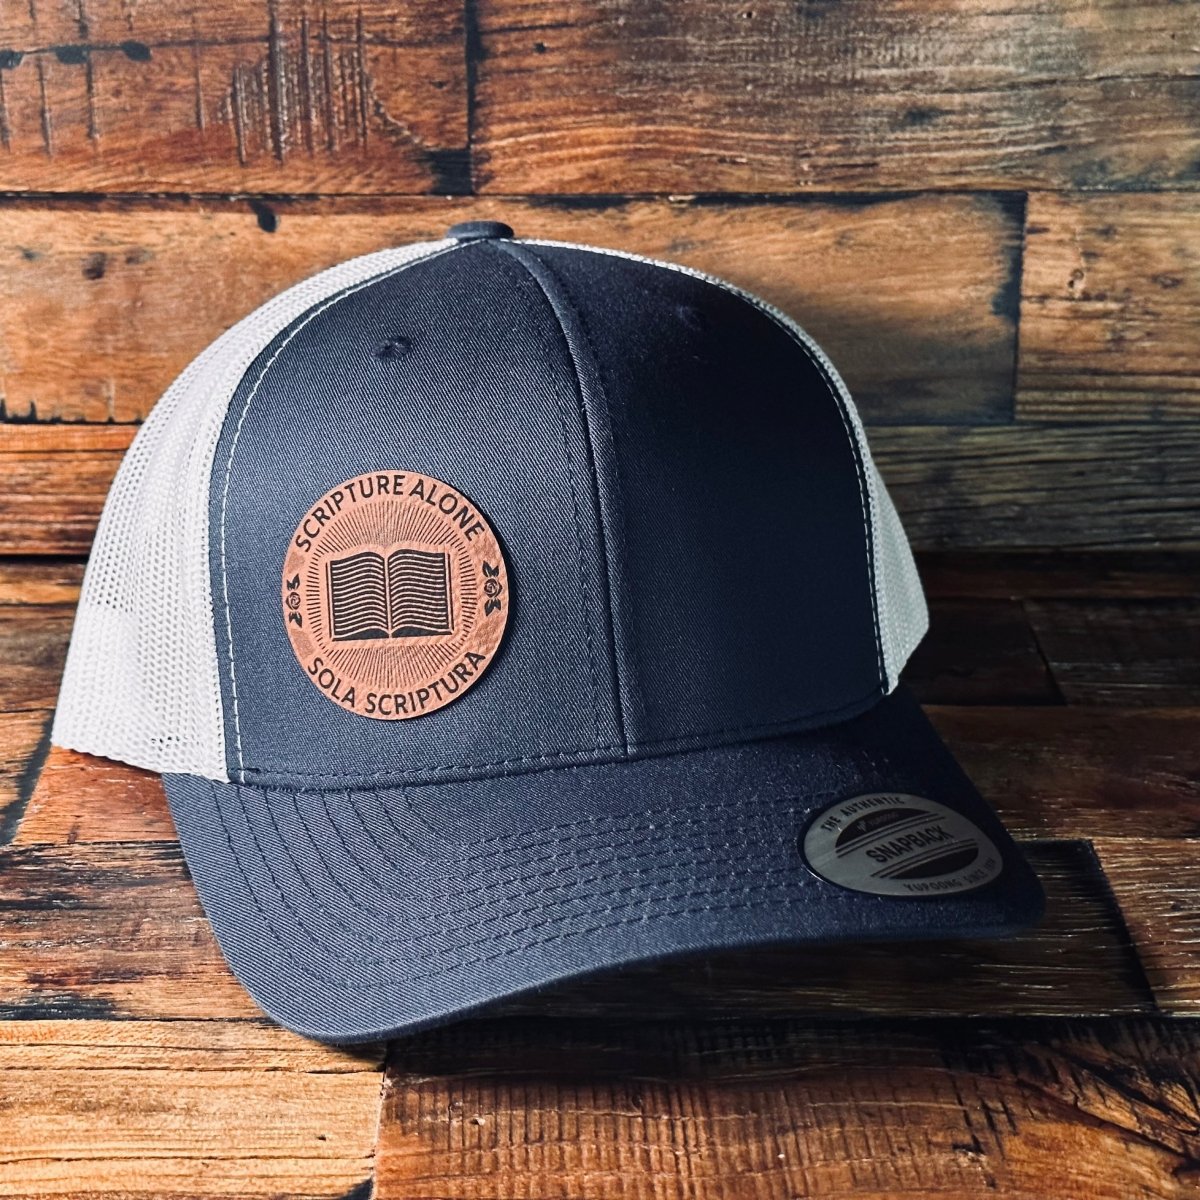 Hat - Sola Scriptura Seal - Patch Hat - The Reformed Sage - #reformed# - #reformed_gifts# - #christian_gifts#